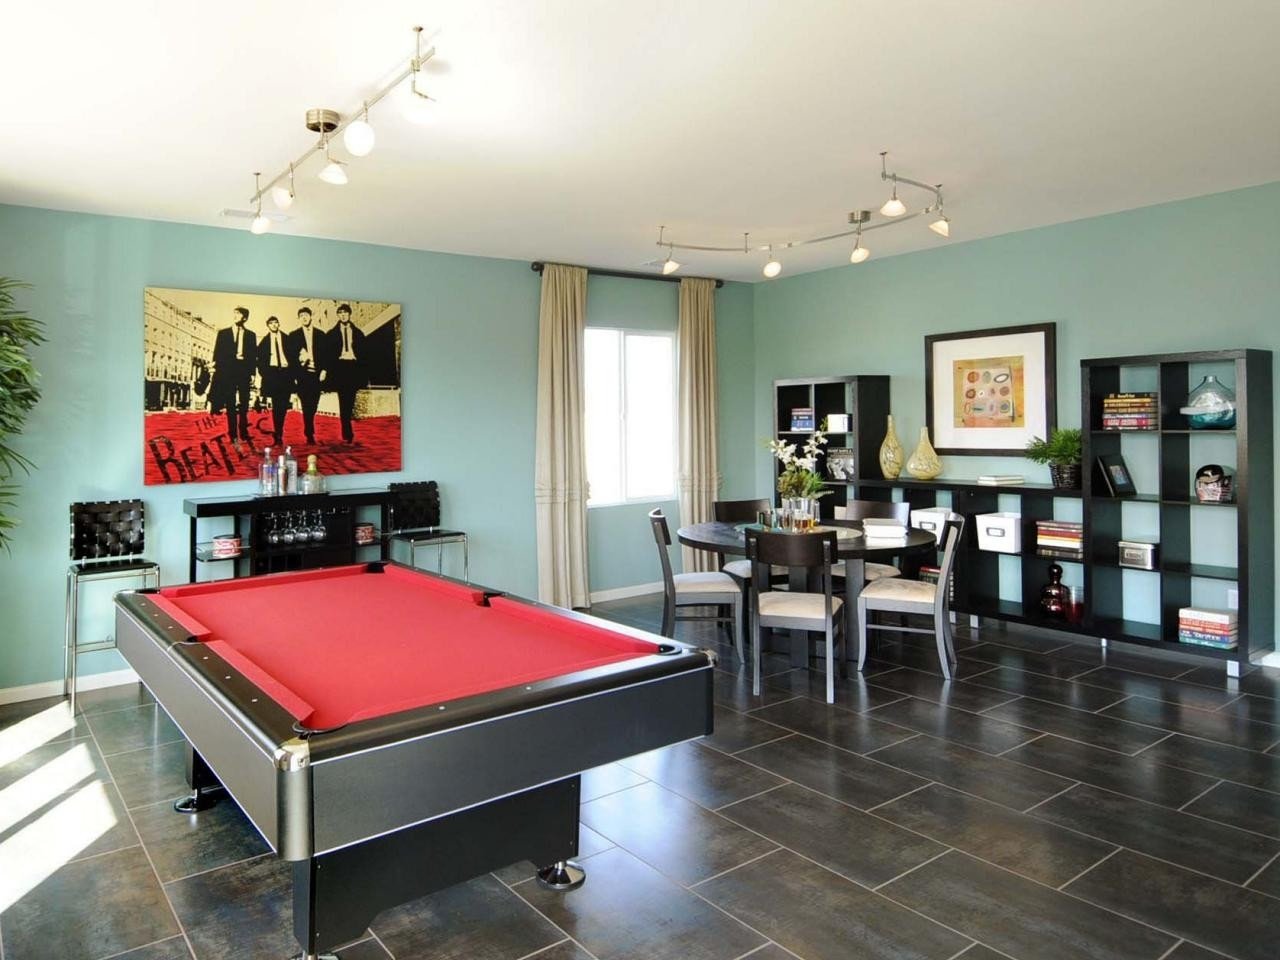 10 Gorgeous Game Room Ideas For Kids kids game room ideas rooms for and family hgtv best 2023